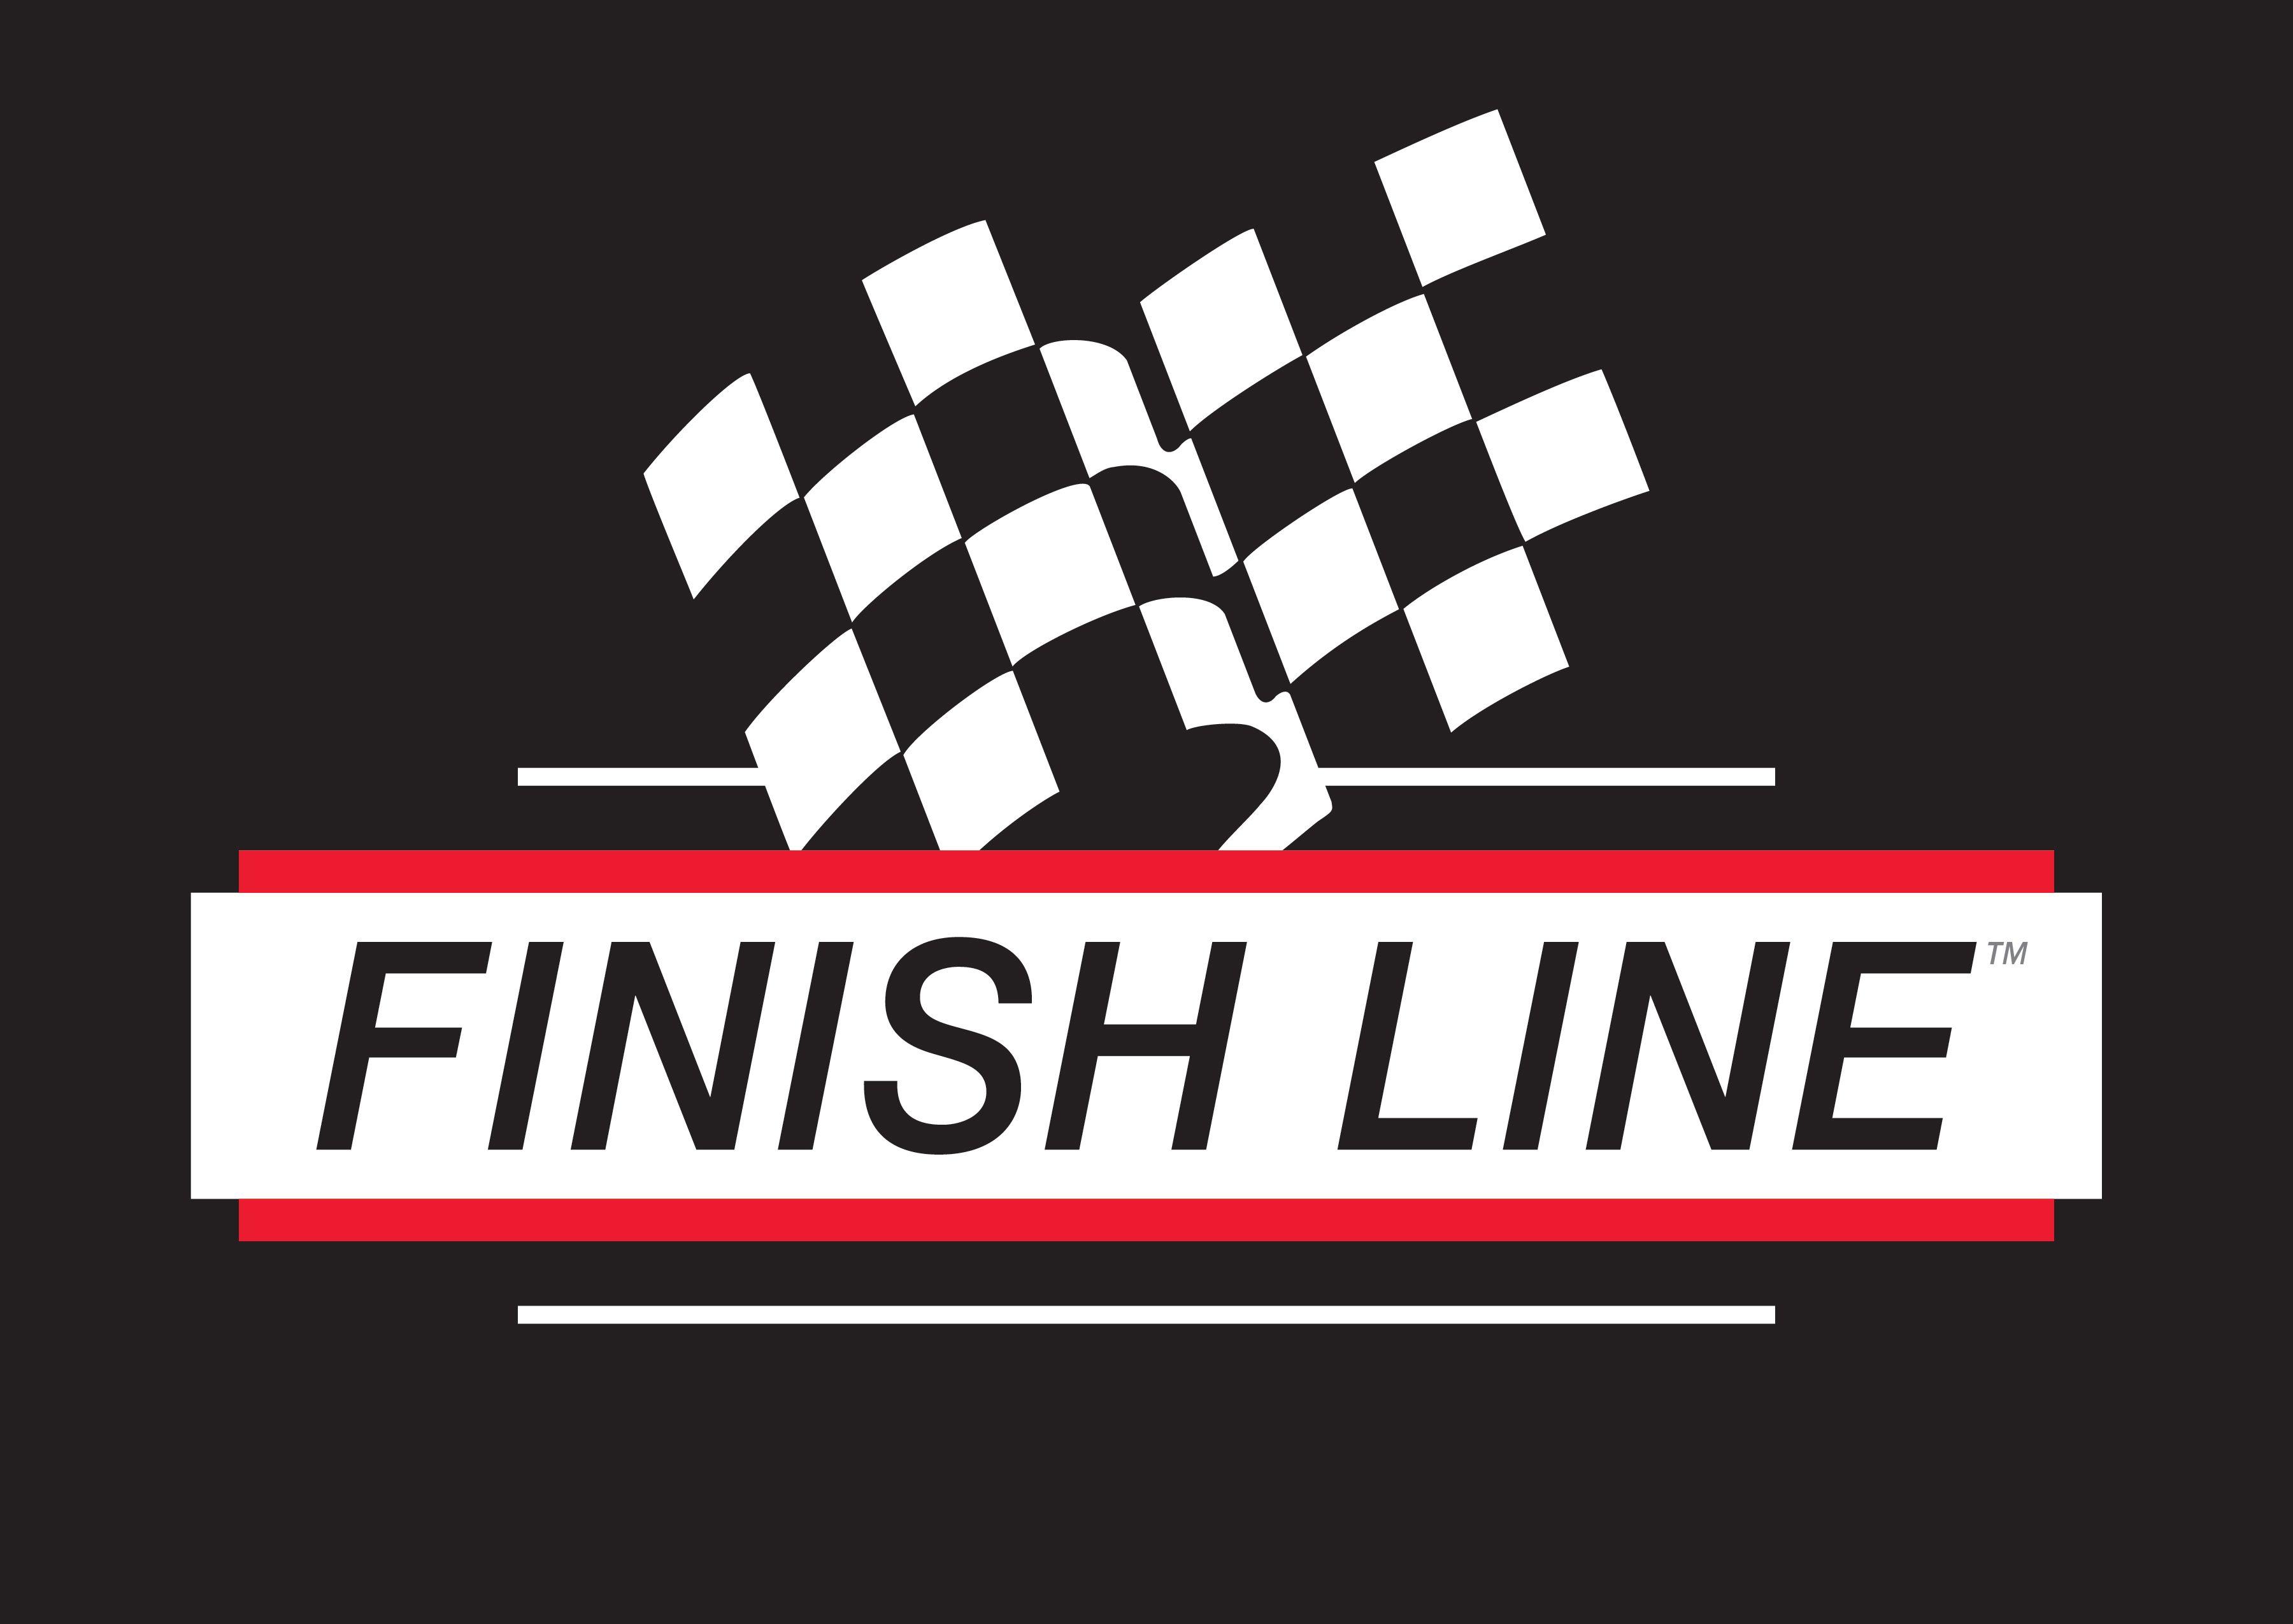 Finishline Logo - Finish Line Lubricants and Care Products